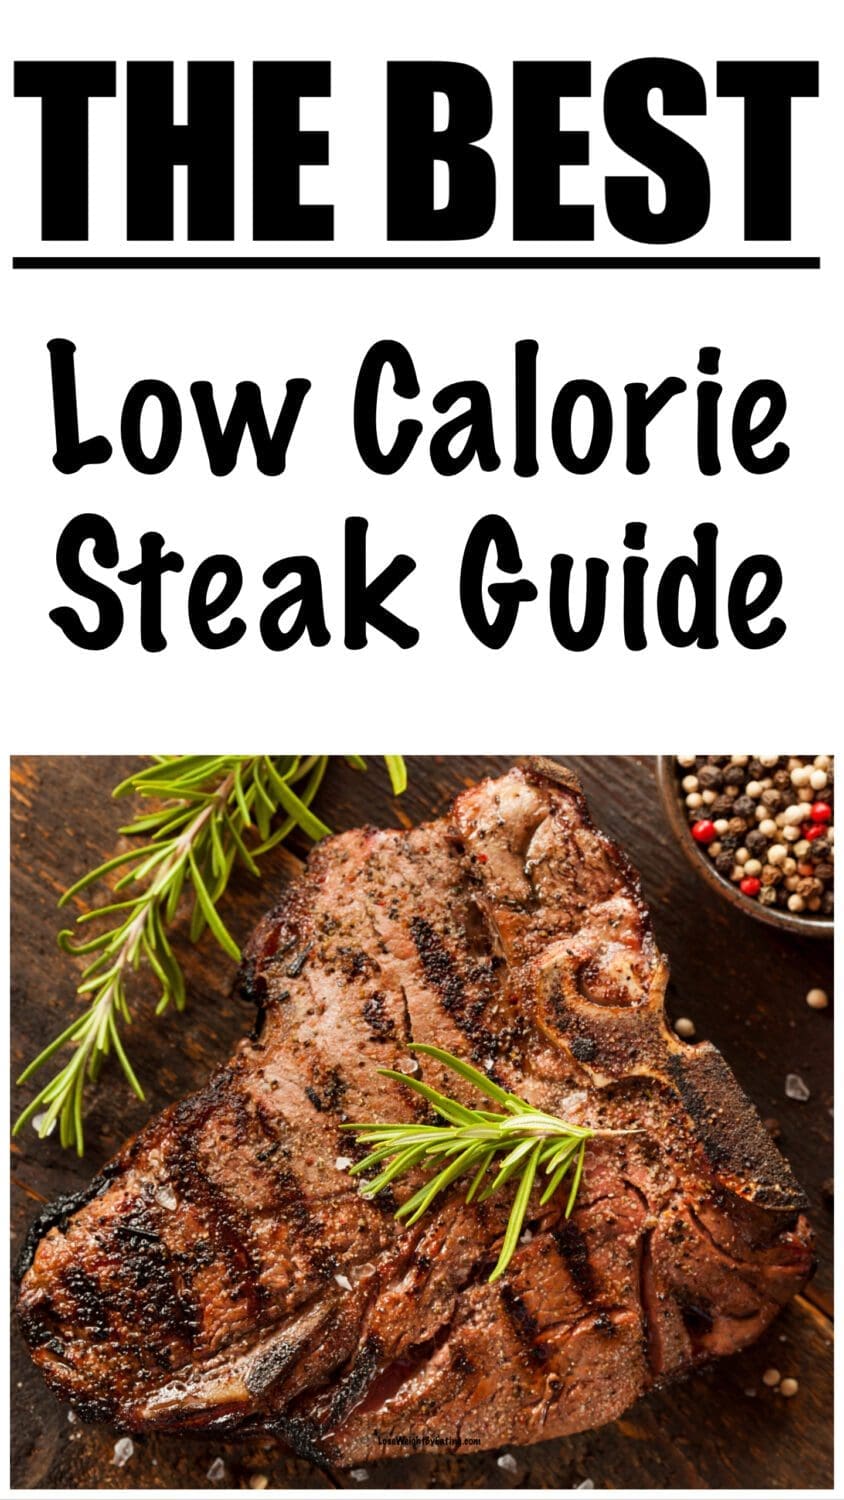 How Many Calories are in a Steak